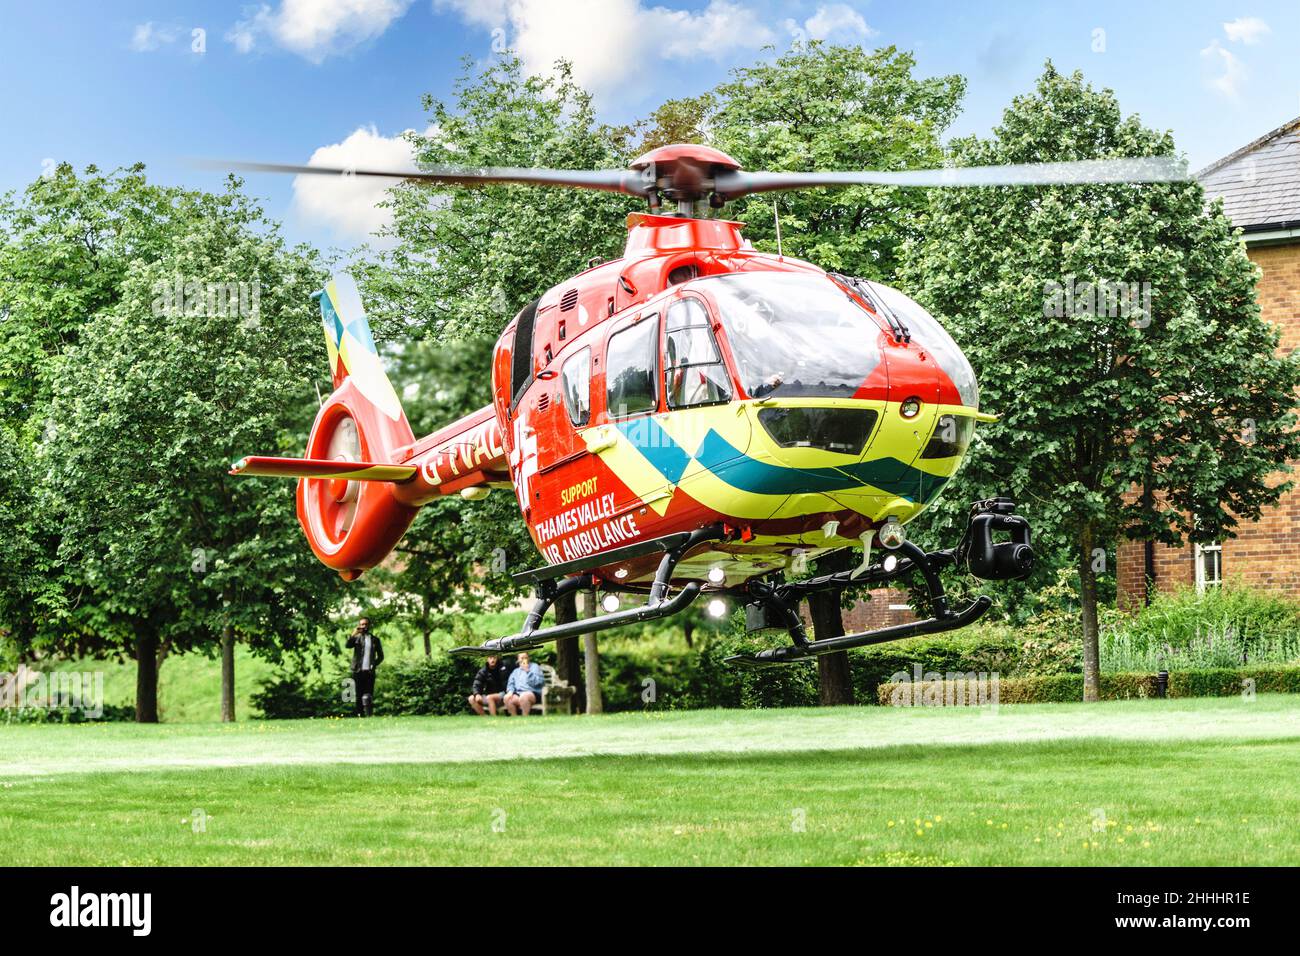 Thames Valley Air Ambulance crew called to a housing development to stabilise and transport a patient to hospital. Stock Photo